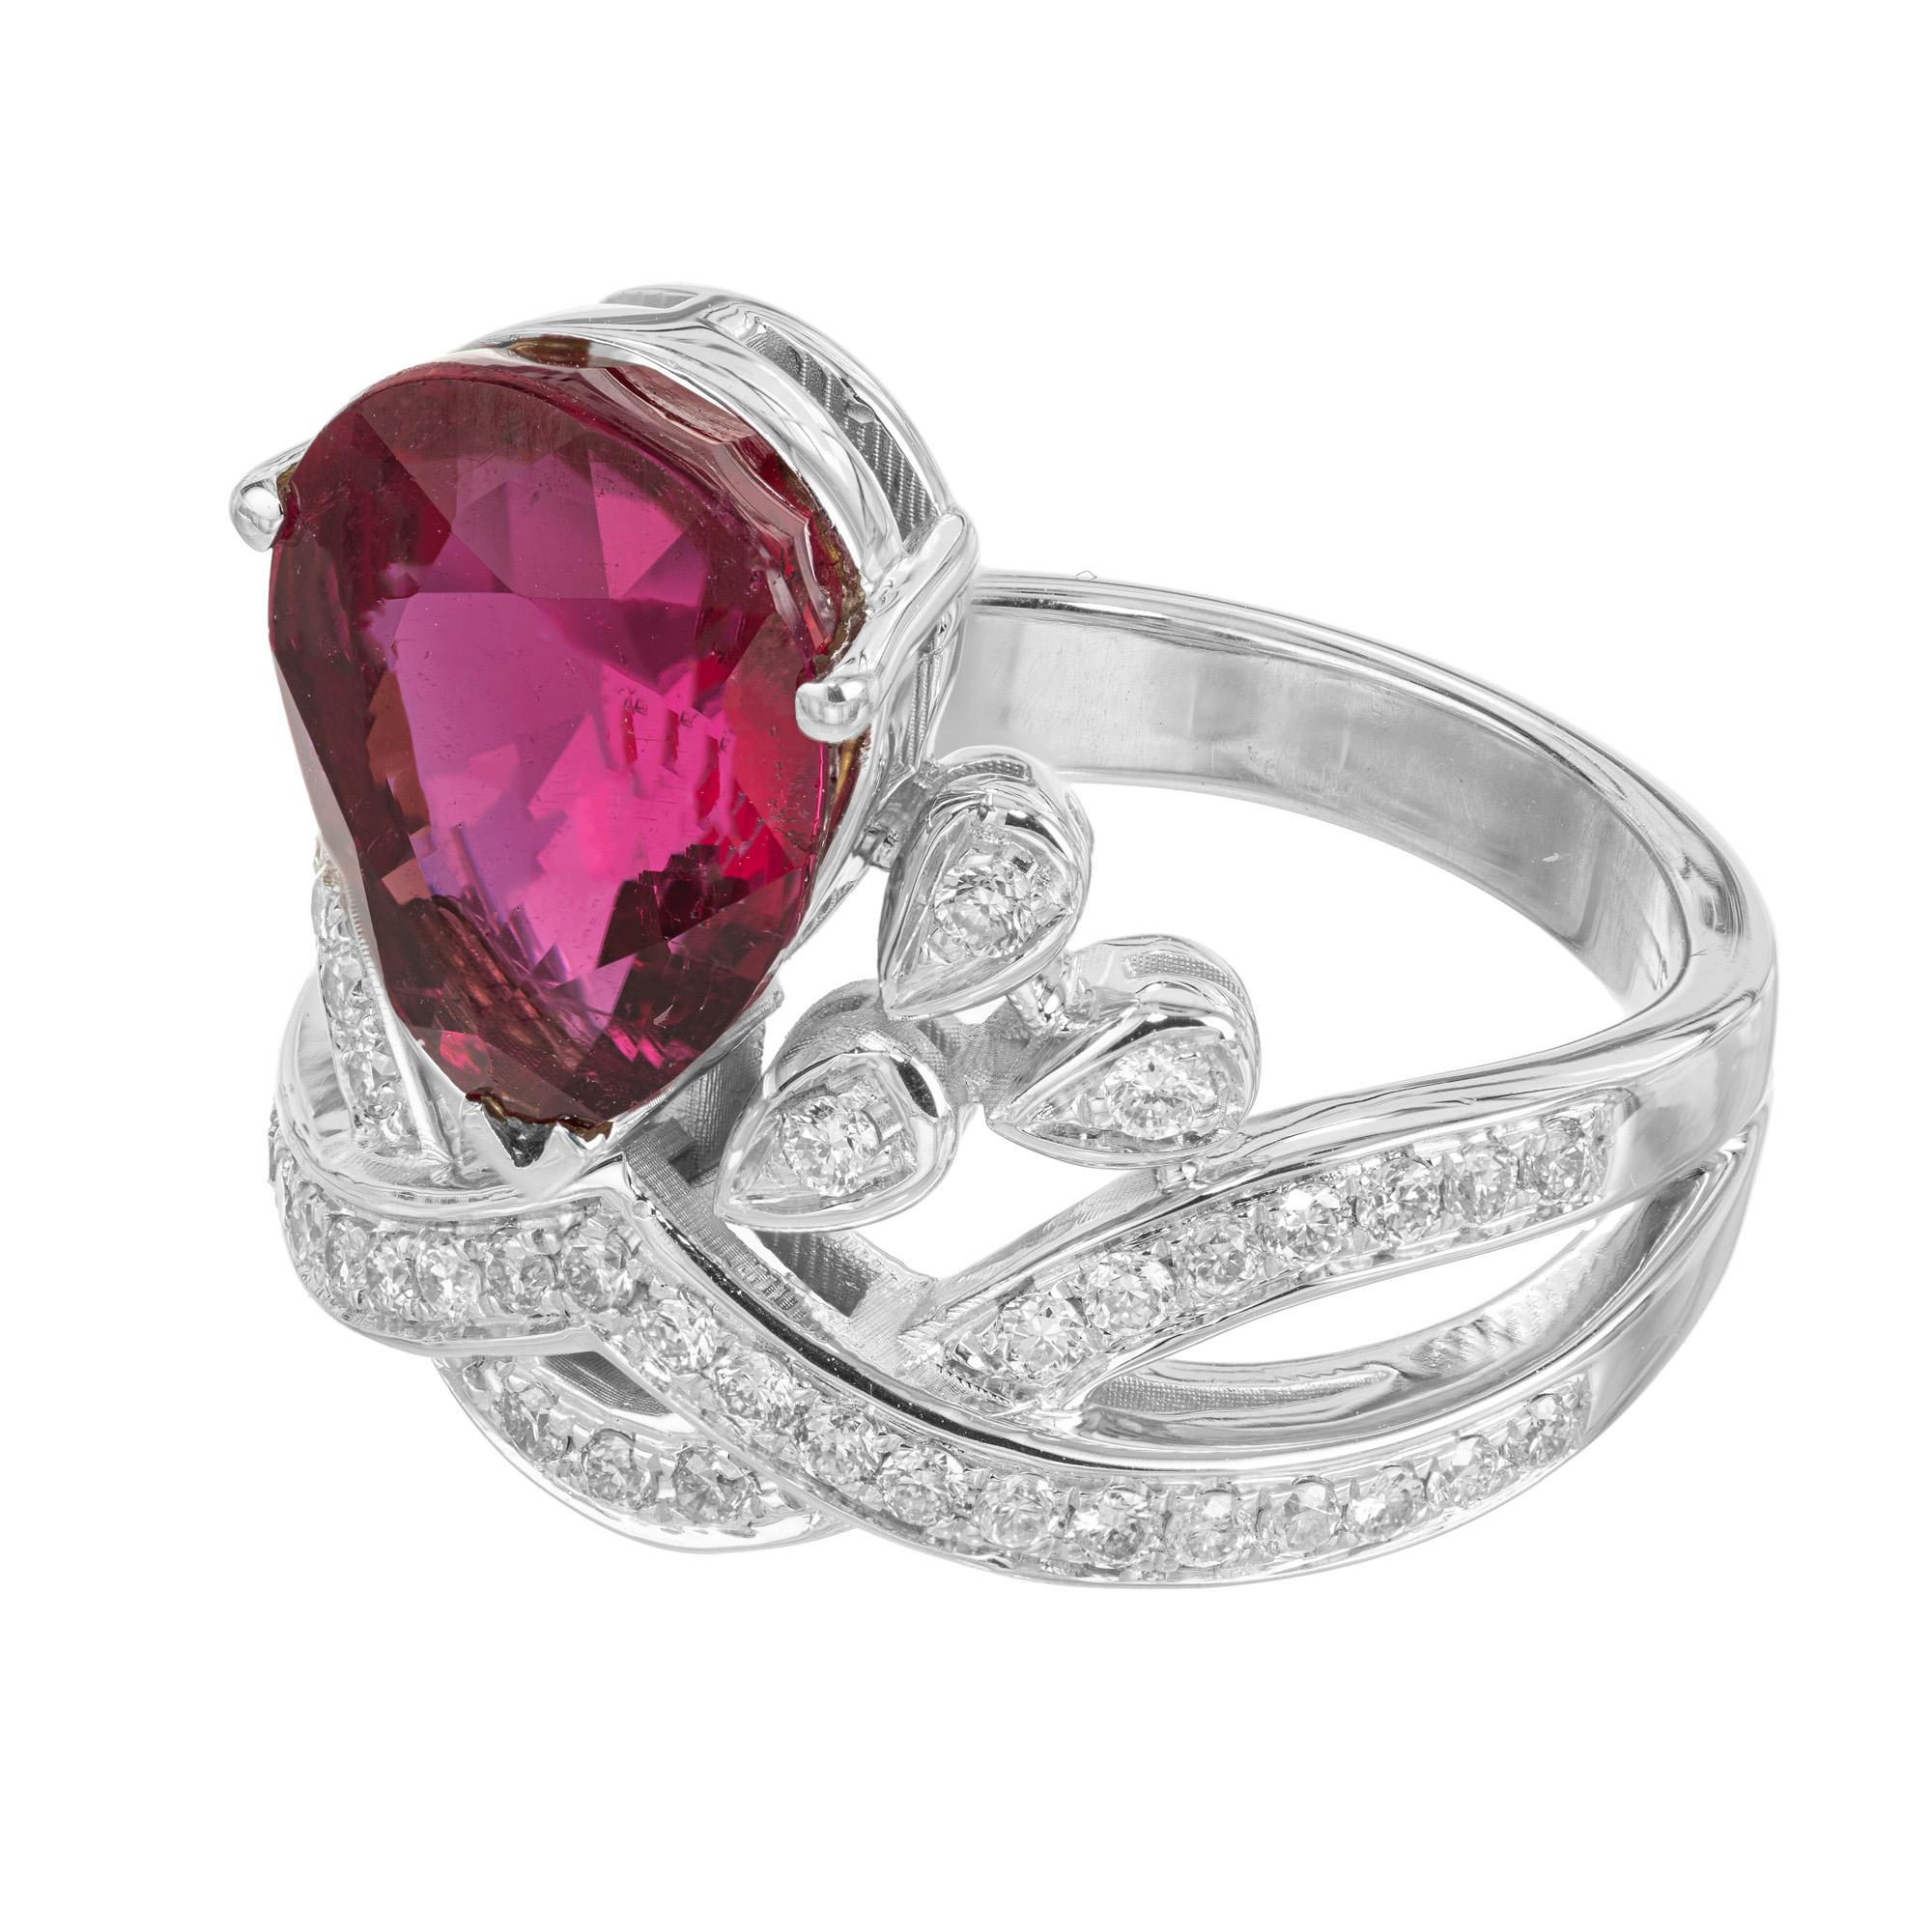 Bright reddish pink pear shaped tourmaline and diamond tiara style cocktail ring. This ring begins with a dazzling 3.15 carat deep, rich, pear shaped tourmaline. Mounted in a crown style 18k white gold setting which is adorned by 46 round brilliant